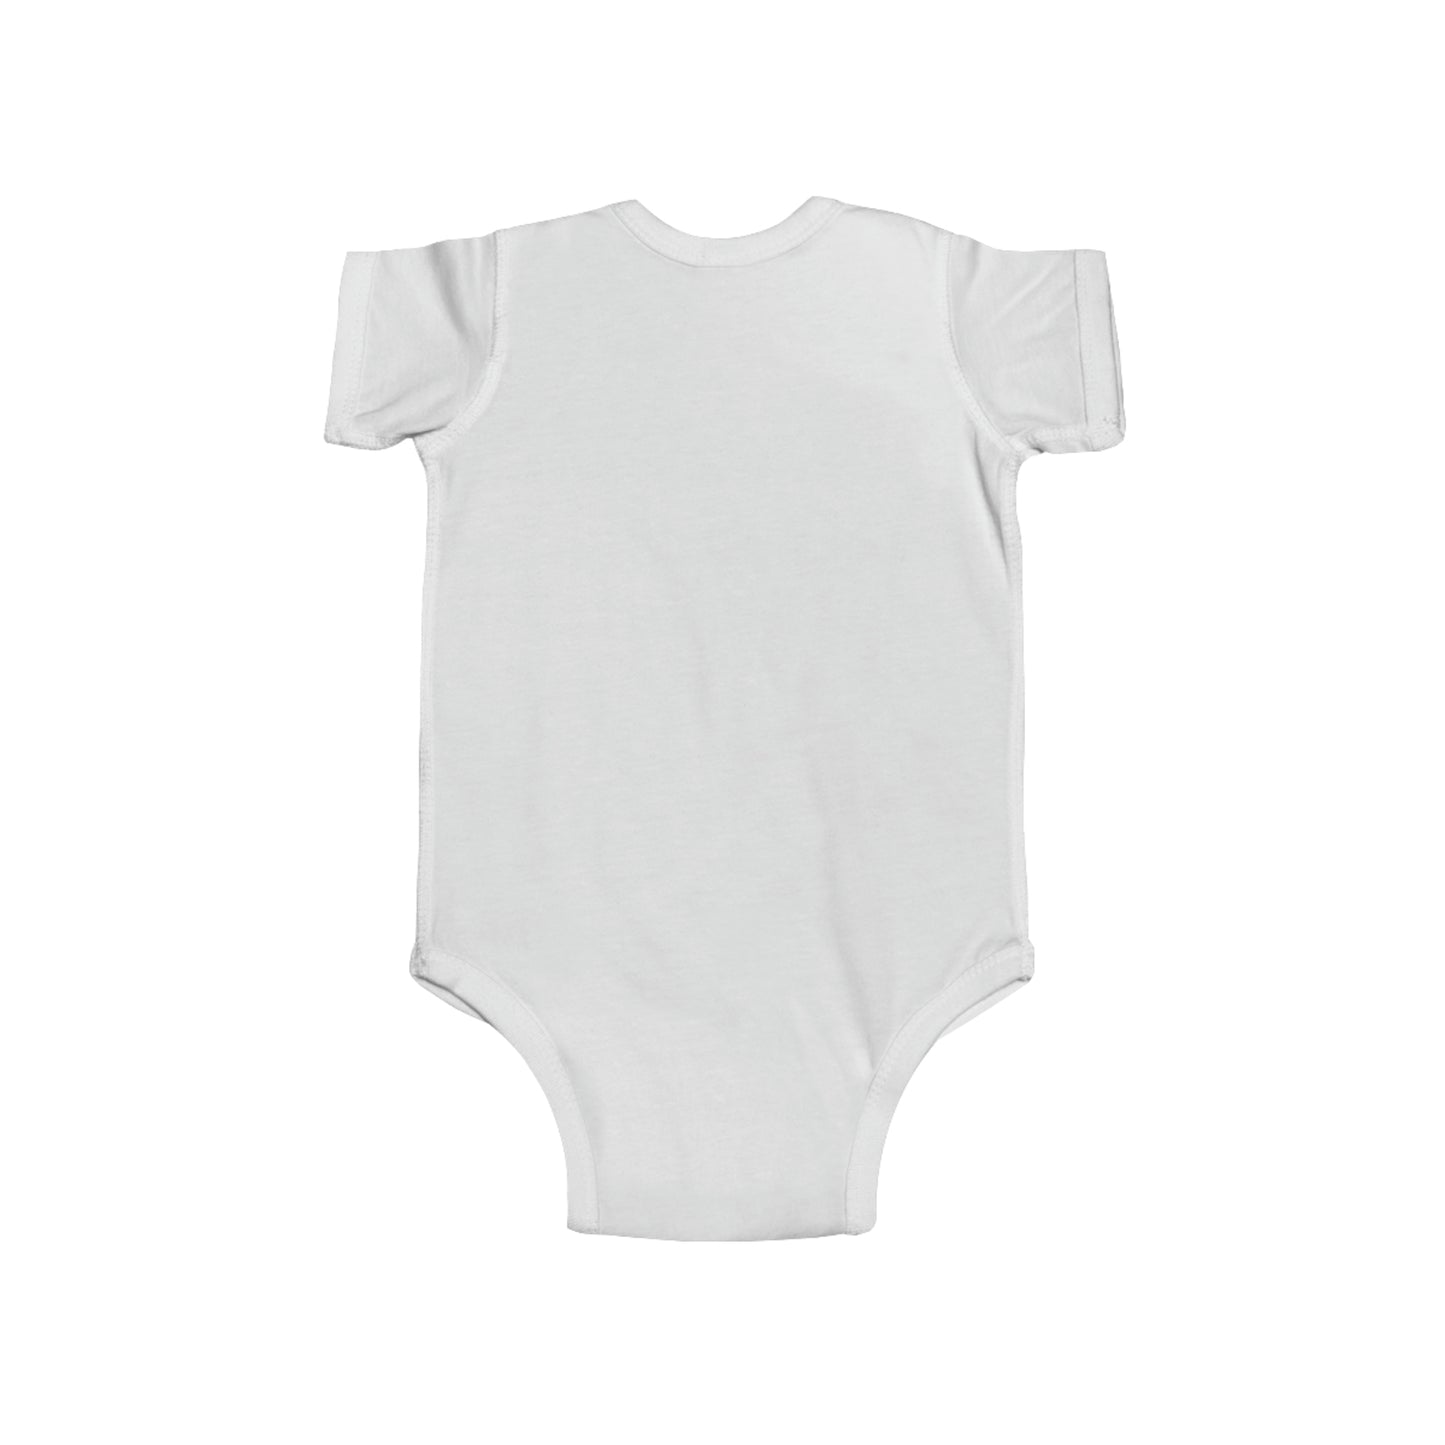 Rise - Biscuit Love - Infant Bodysuit - White